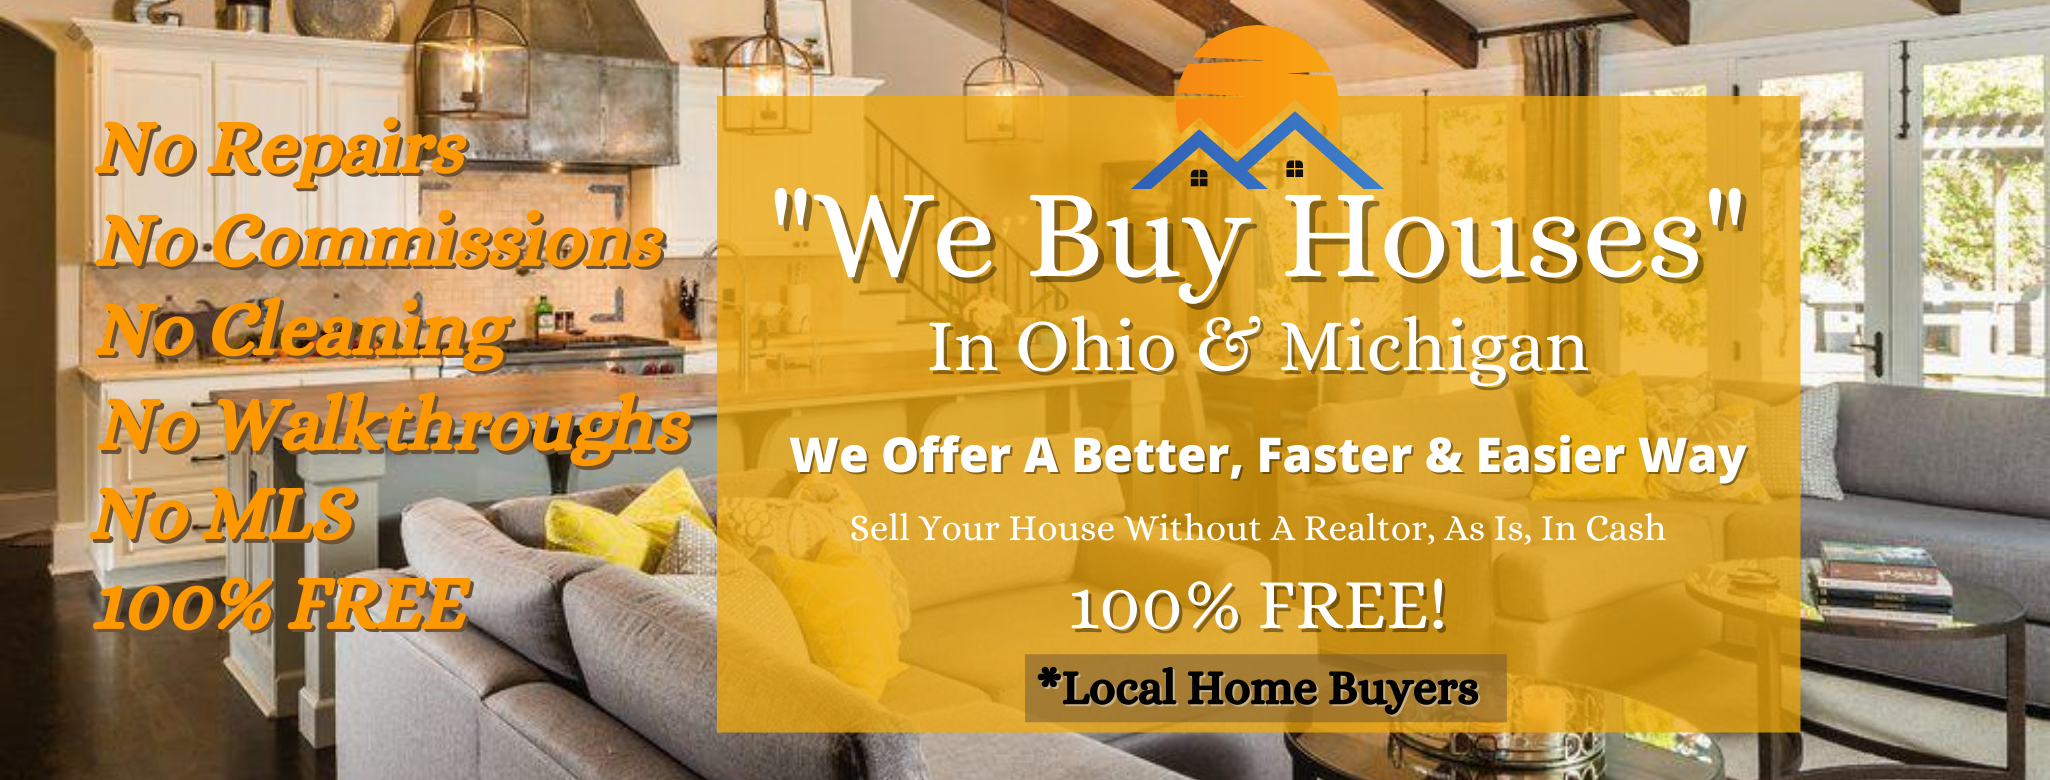 We Buy Houses Toledo - Sell Your House Fast!